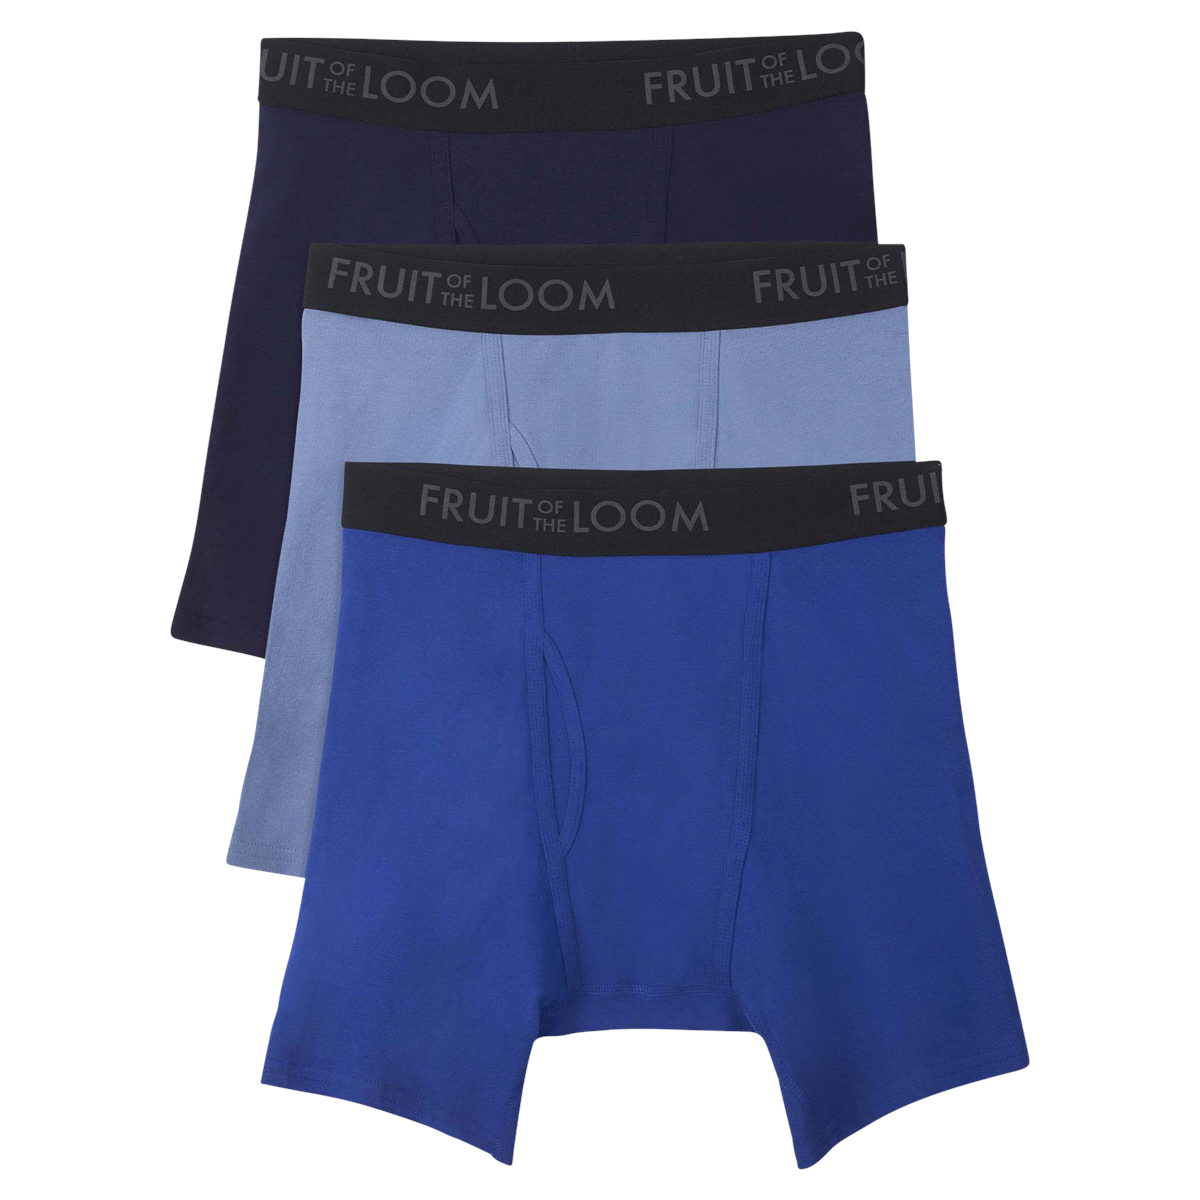 Fruit of the Loom Men's Breathable Cotton Micro-Mesh Assorted Boxer Briefs,  X-Large 3 ct